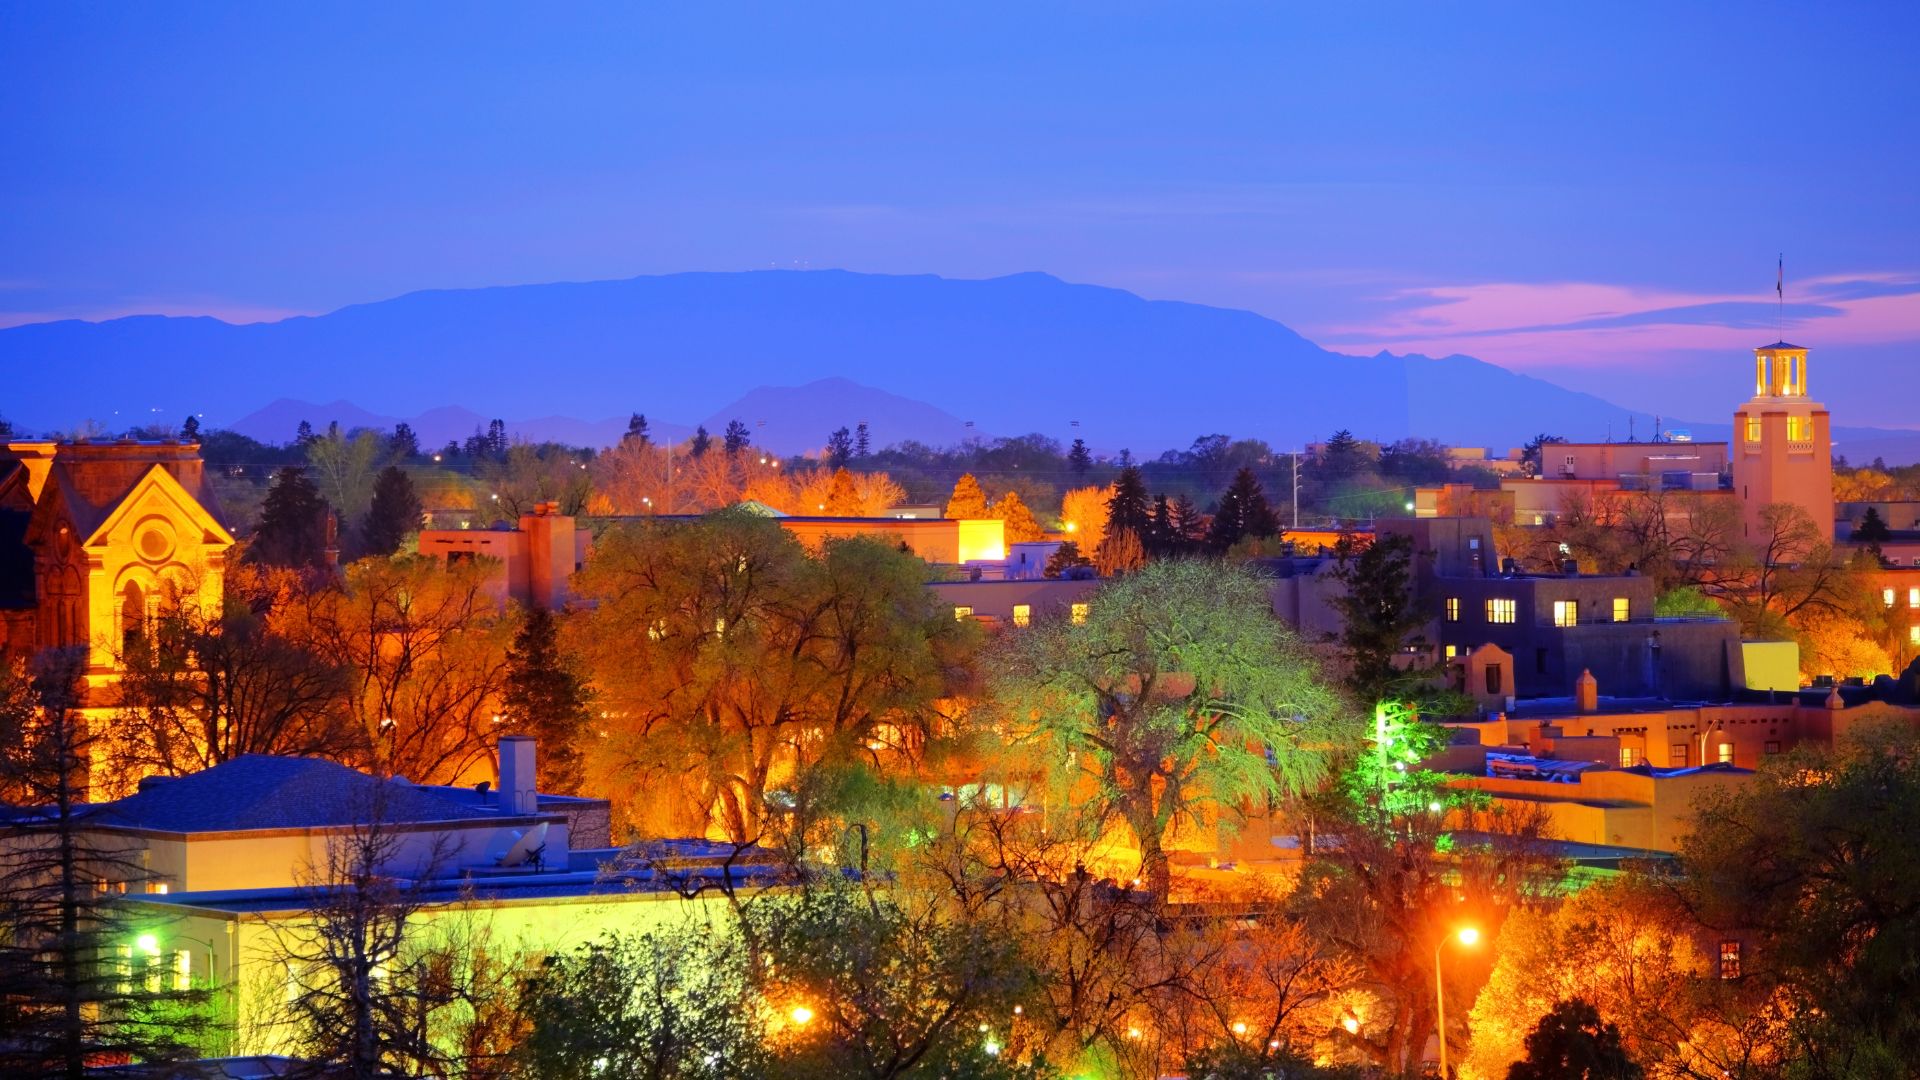 Aerial view of Santa Fe at dusk lit up by colorful night lights